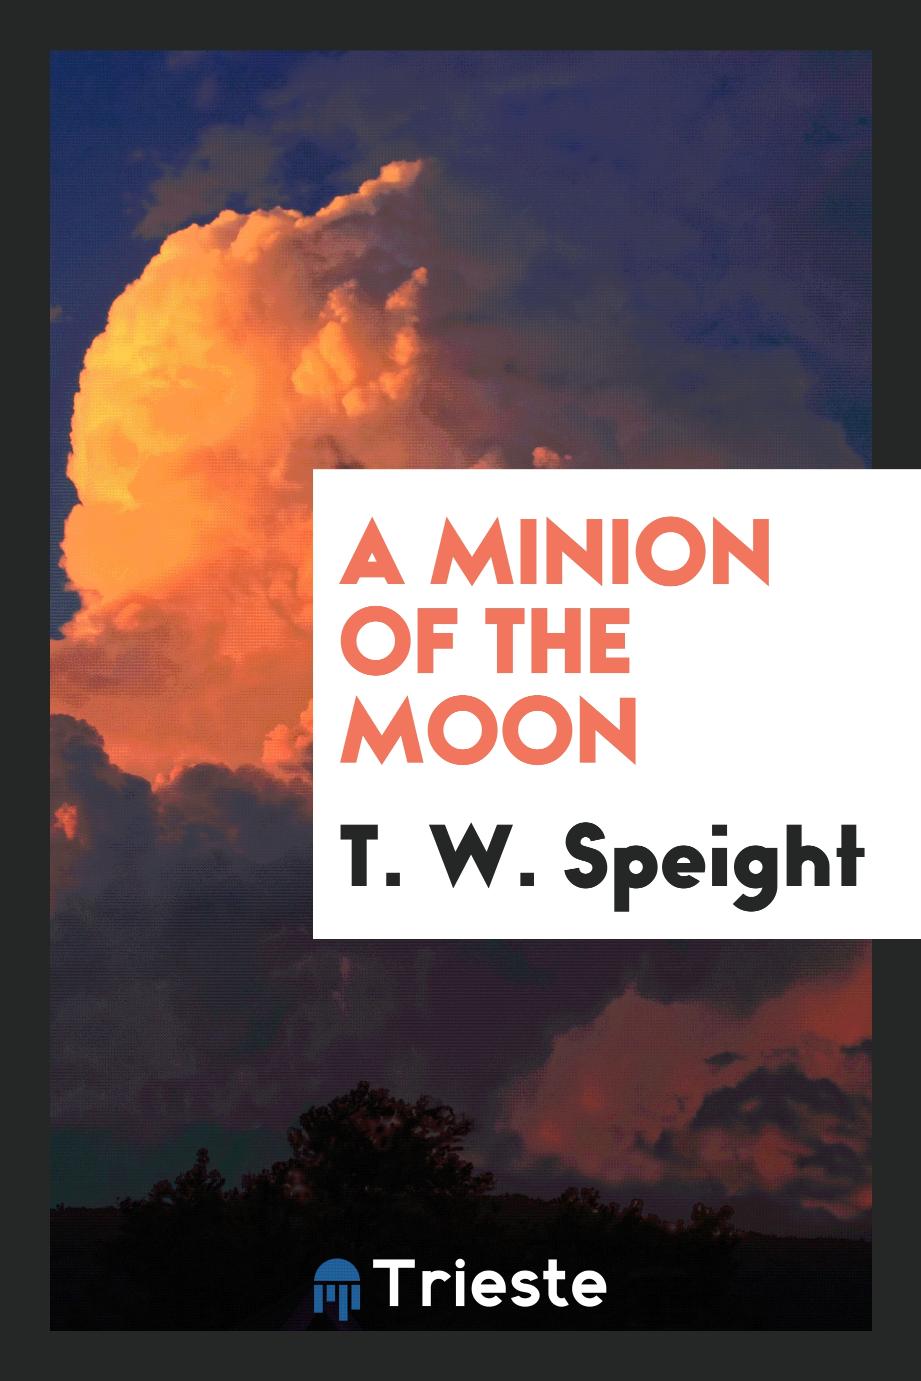 A Minion of the Moon